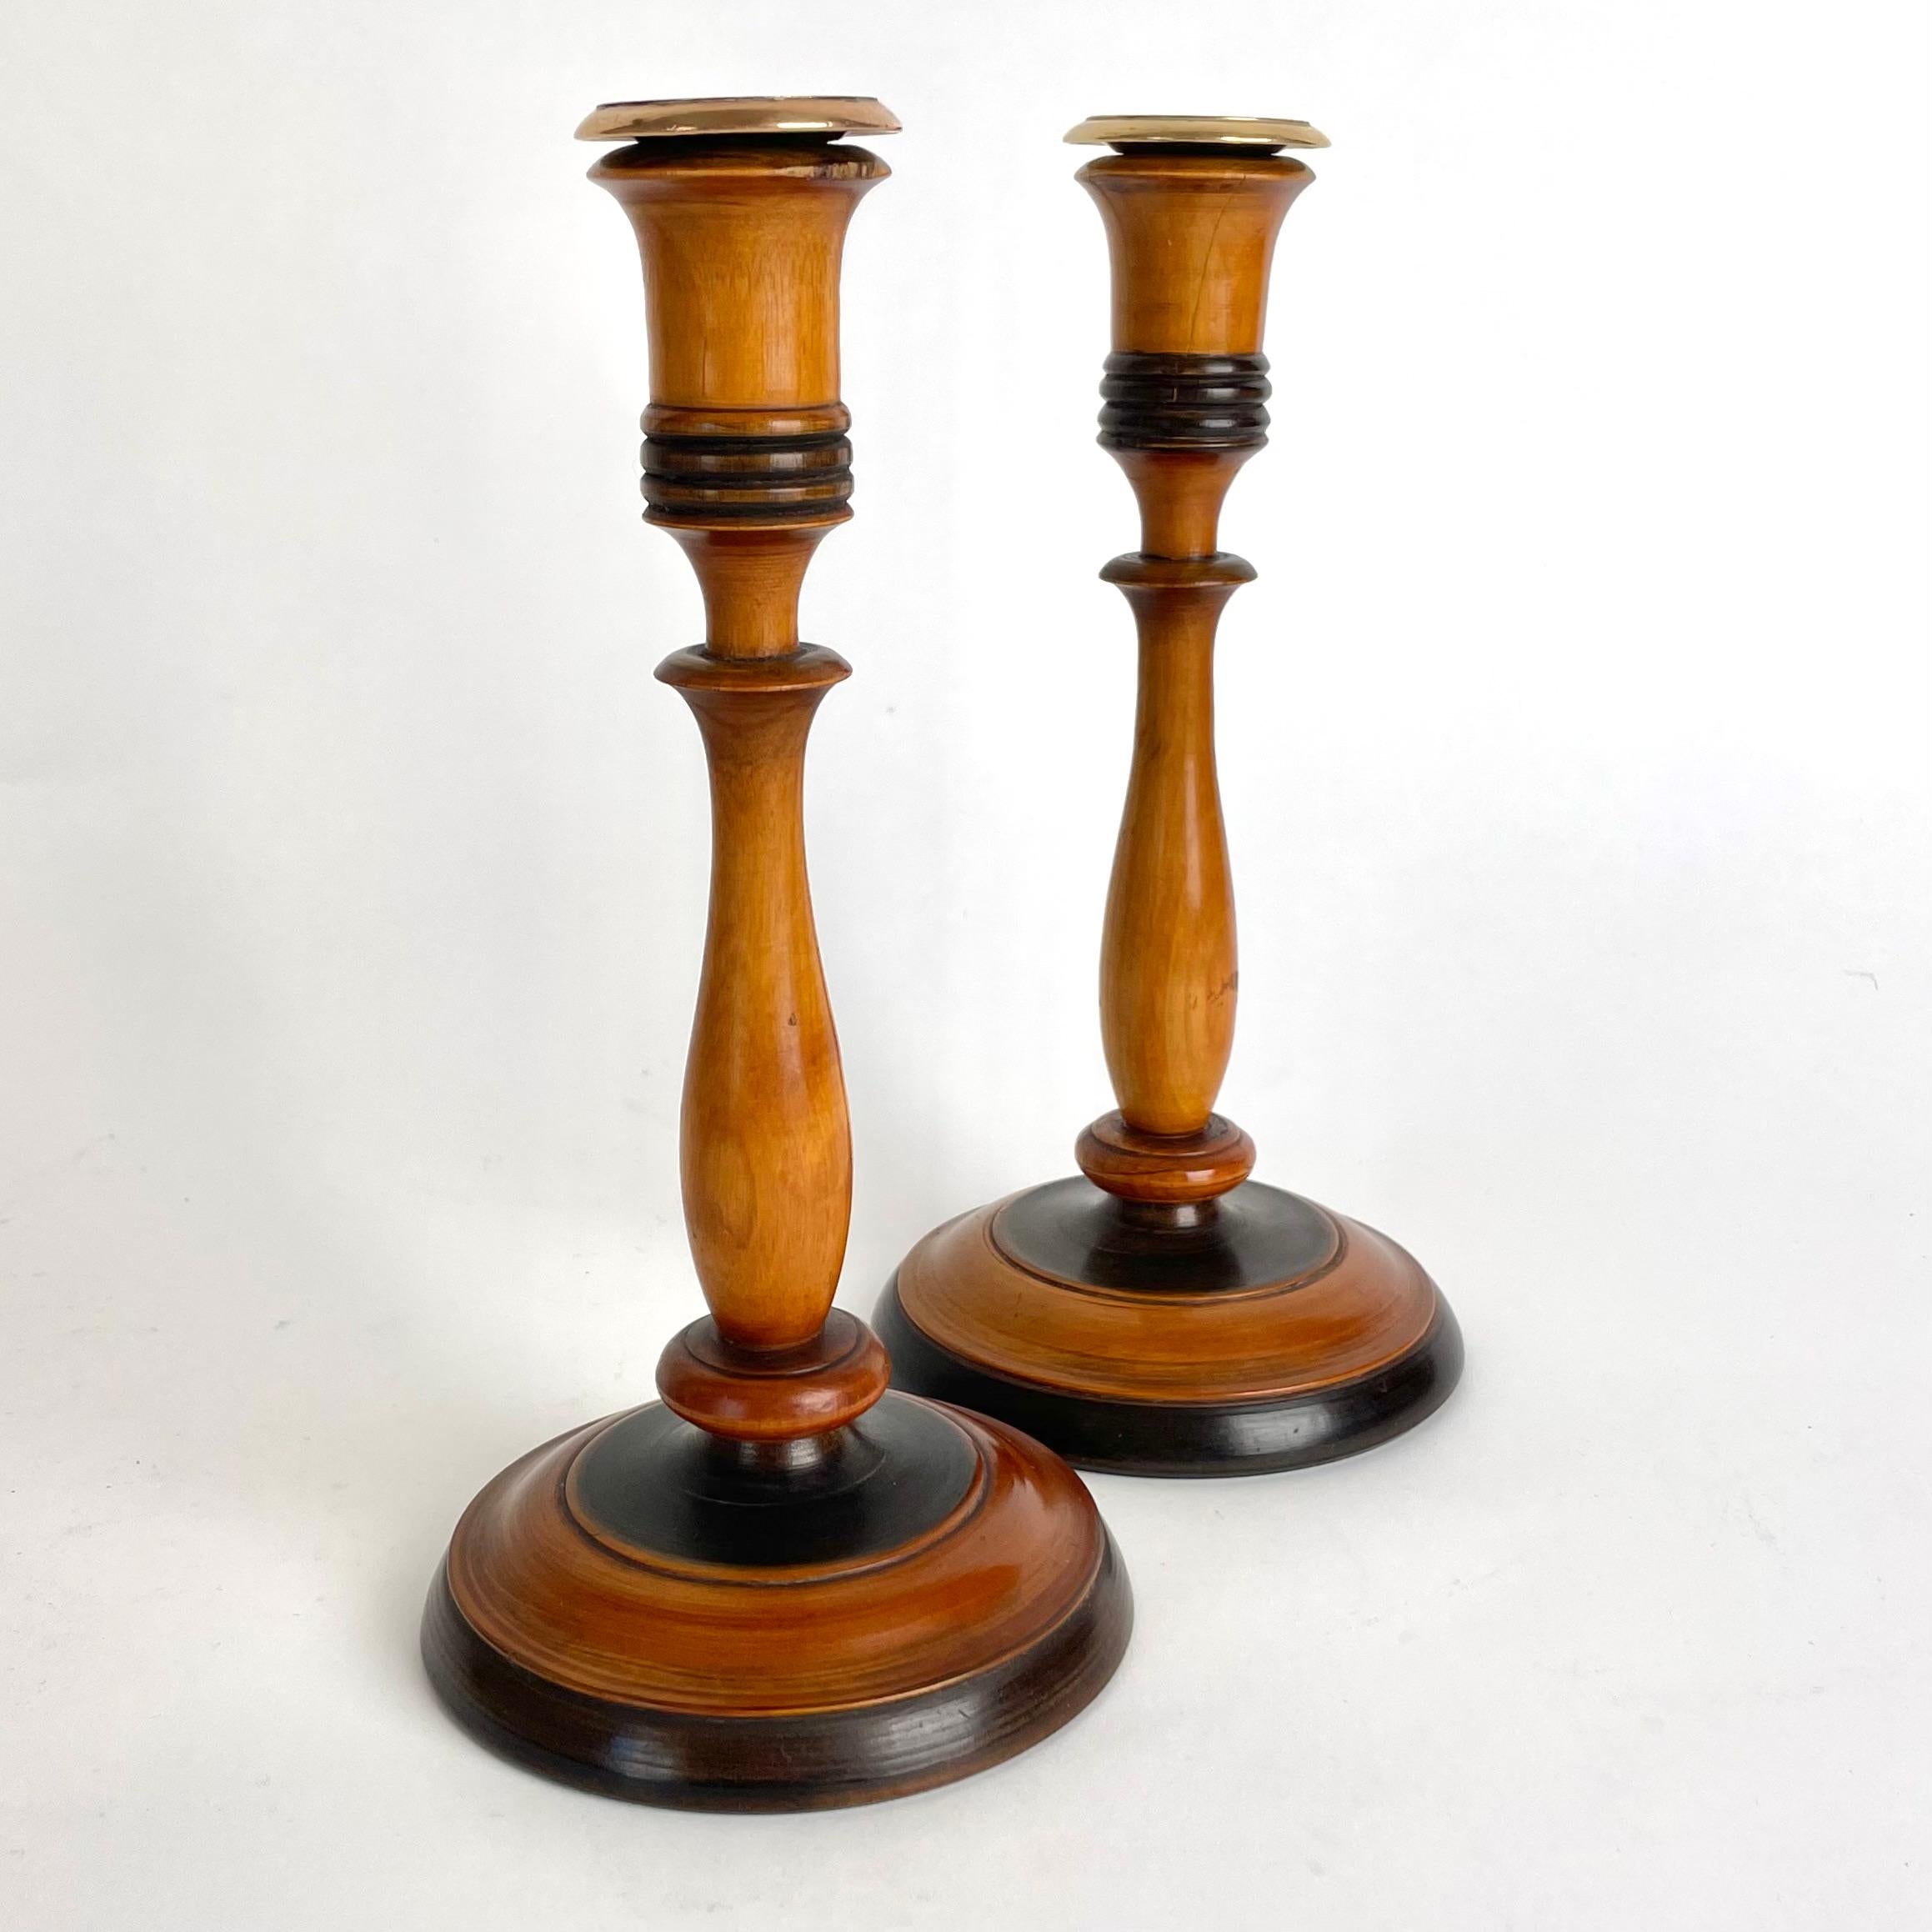 Karl Johan Pair of Birch Candlesticks in Swedish Karl-Johan from the 1820s-1830s For Sale